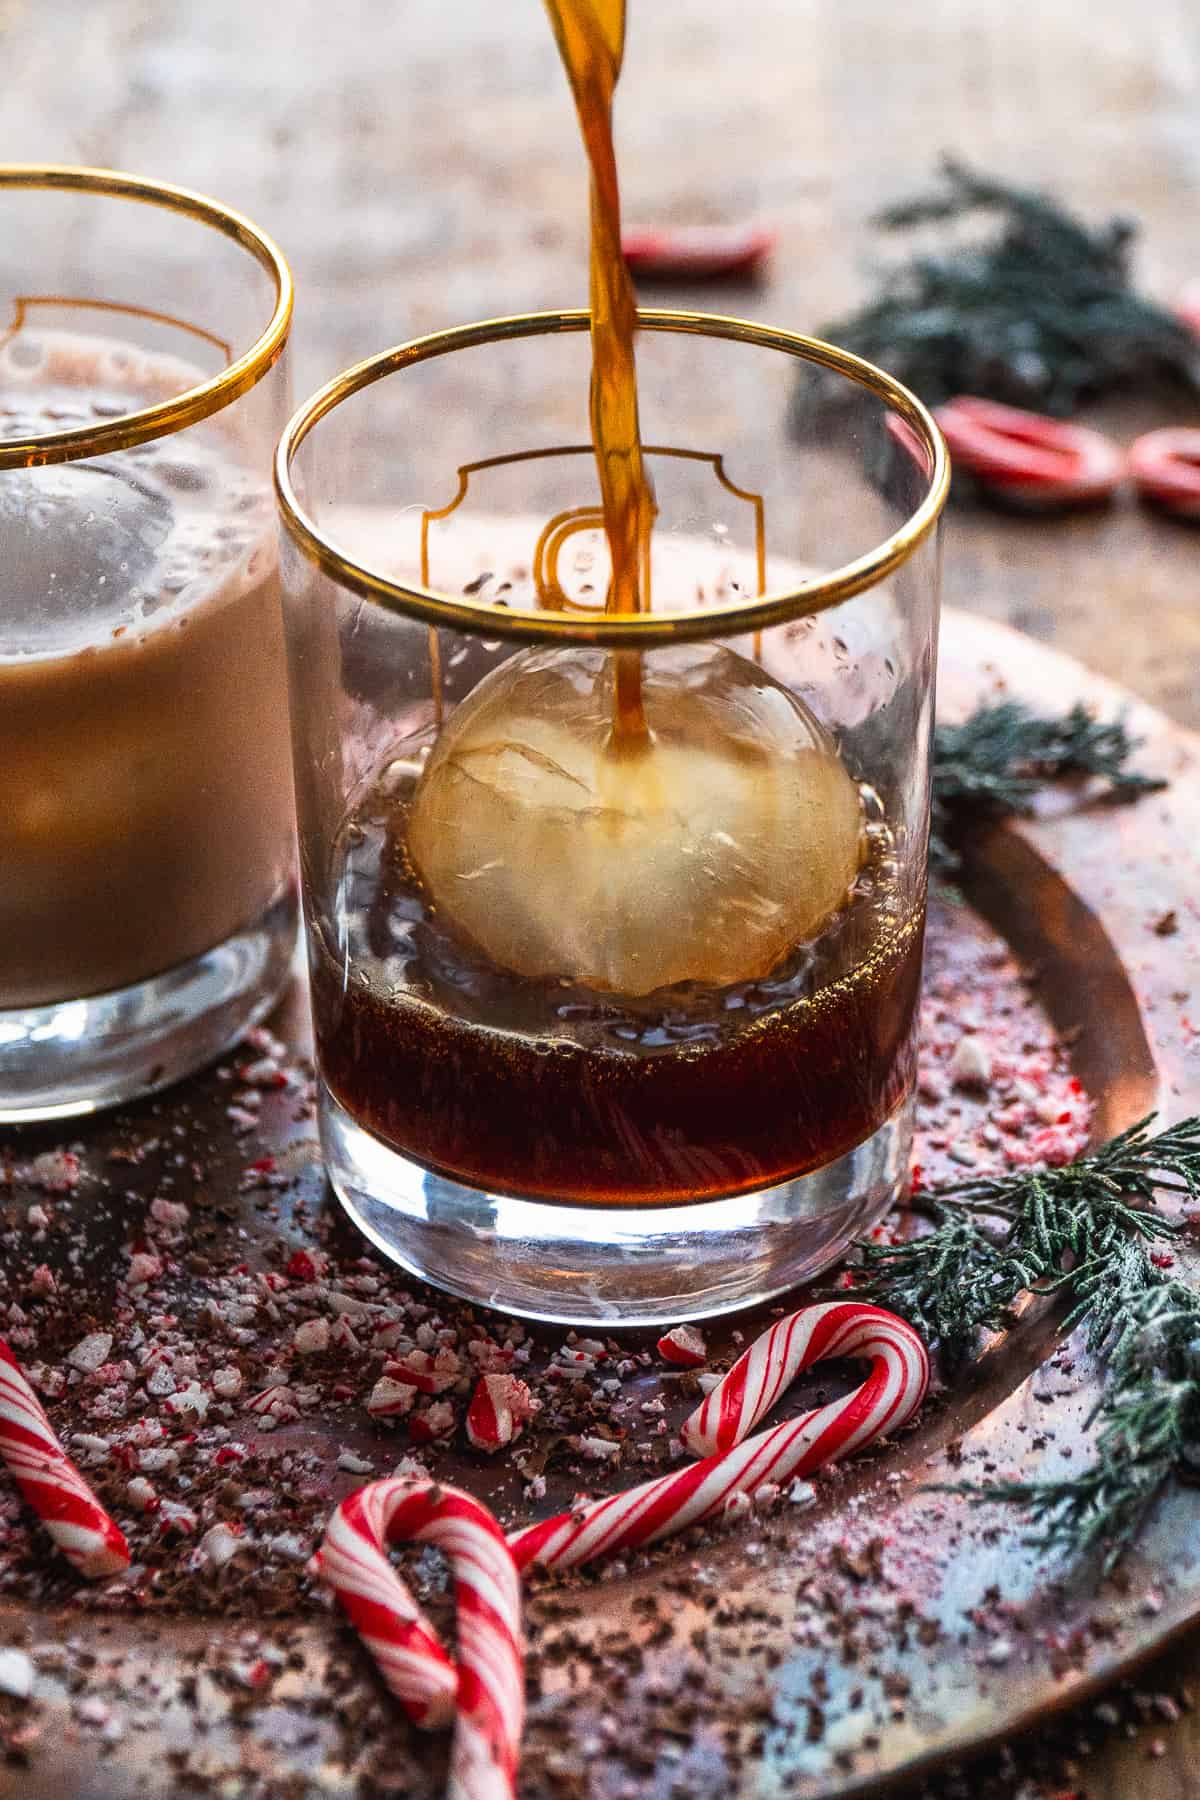 Boozy coffee being poured into a cocktail glass with a circular ice cube.